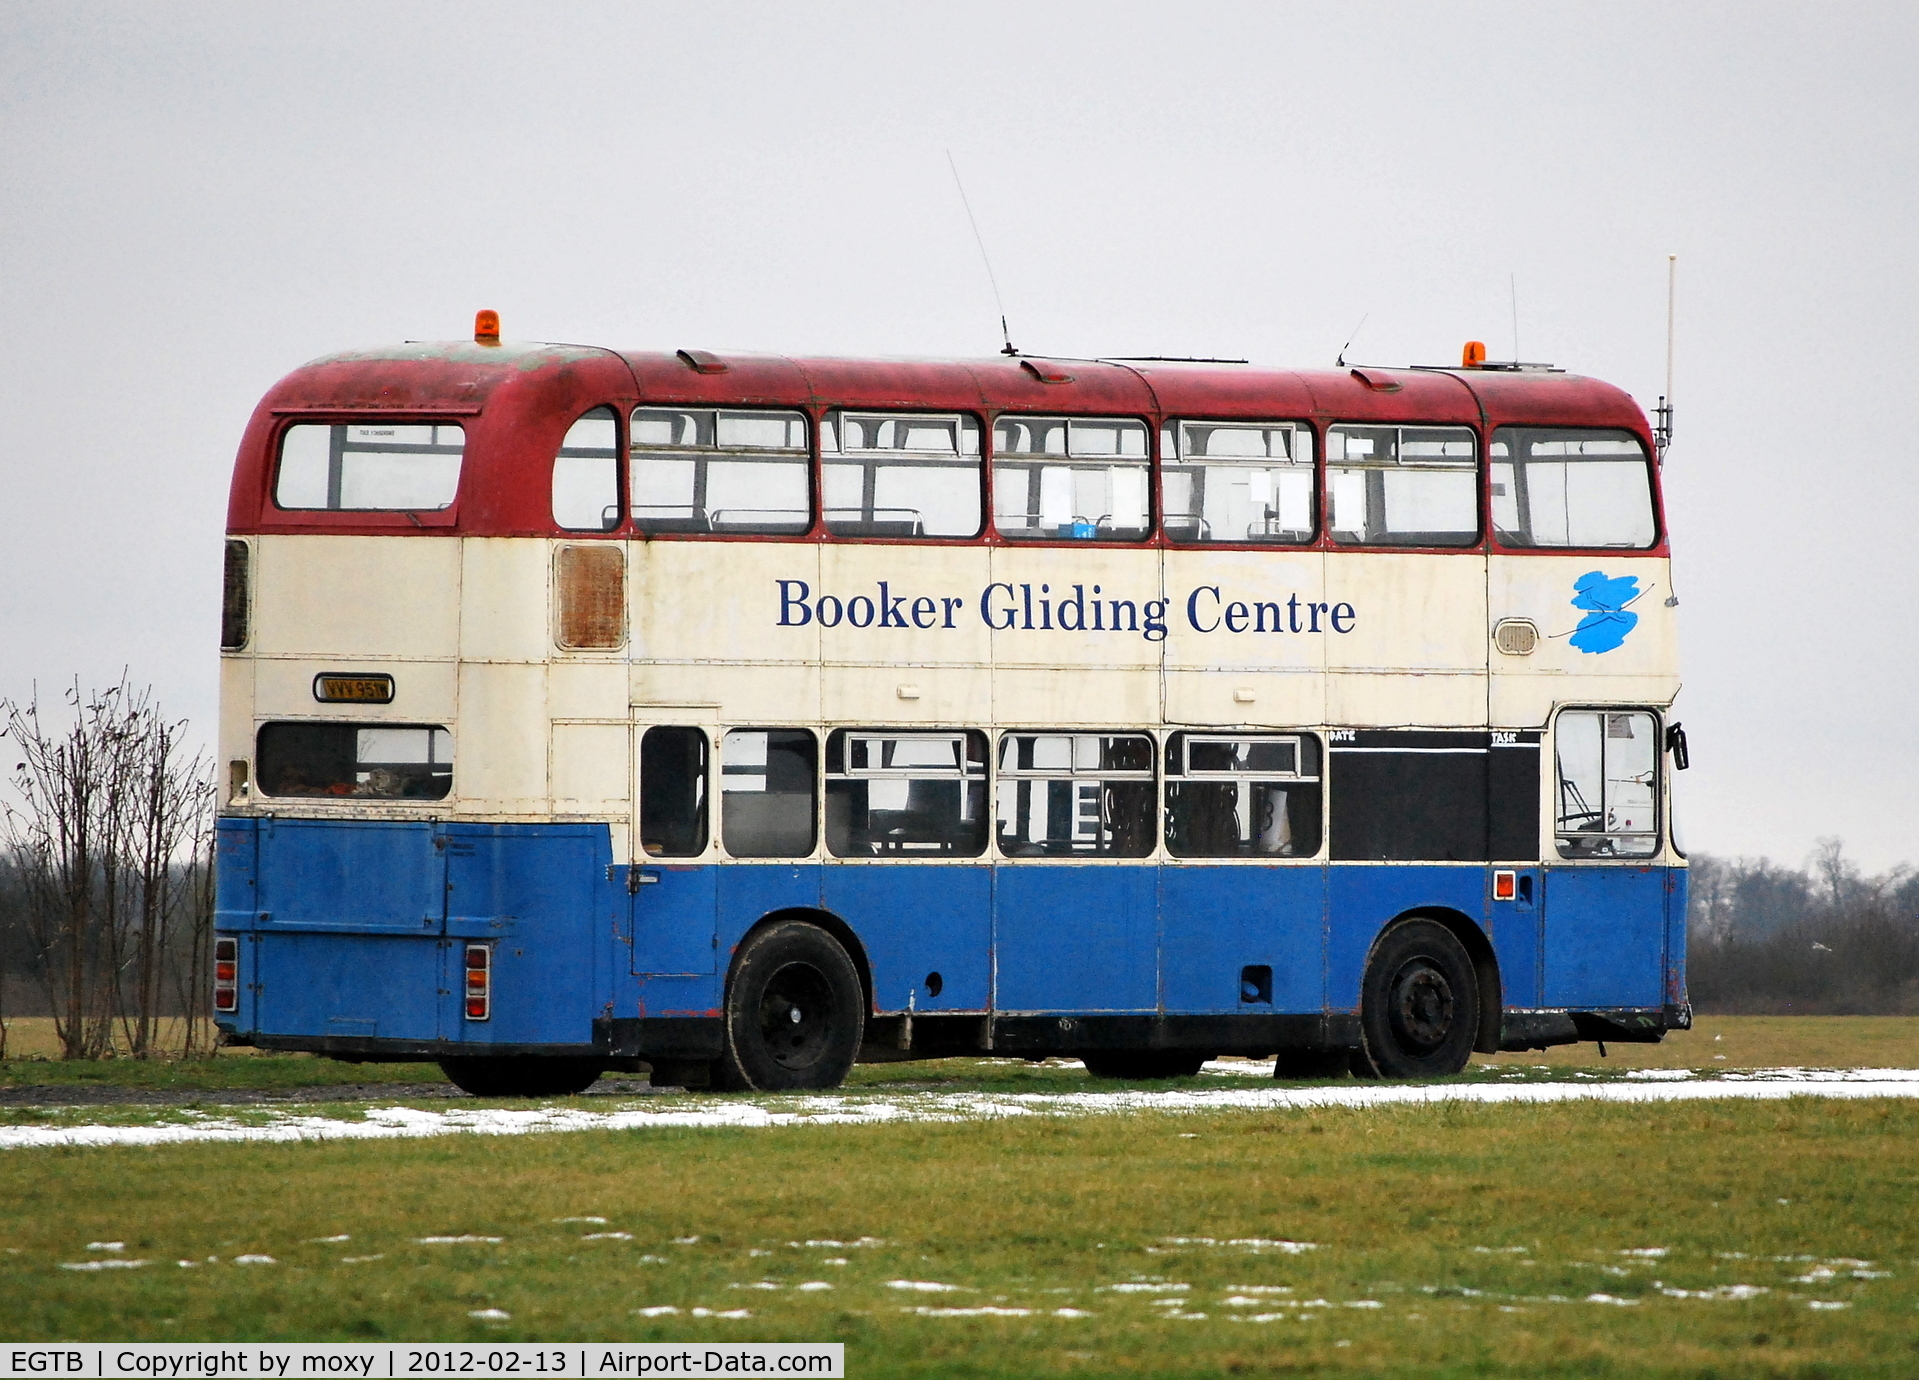 Wycombe Air Park/Booker Airport, High Wycombe, England United Kingdom (EGTB) - Booker Gliding Centre's bus at Wycombe Air Park.
For those bus fans, it's a Bristol VRT ex United Counties.